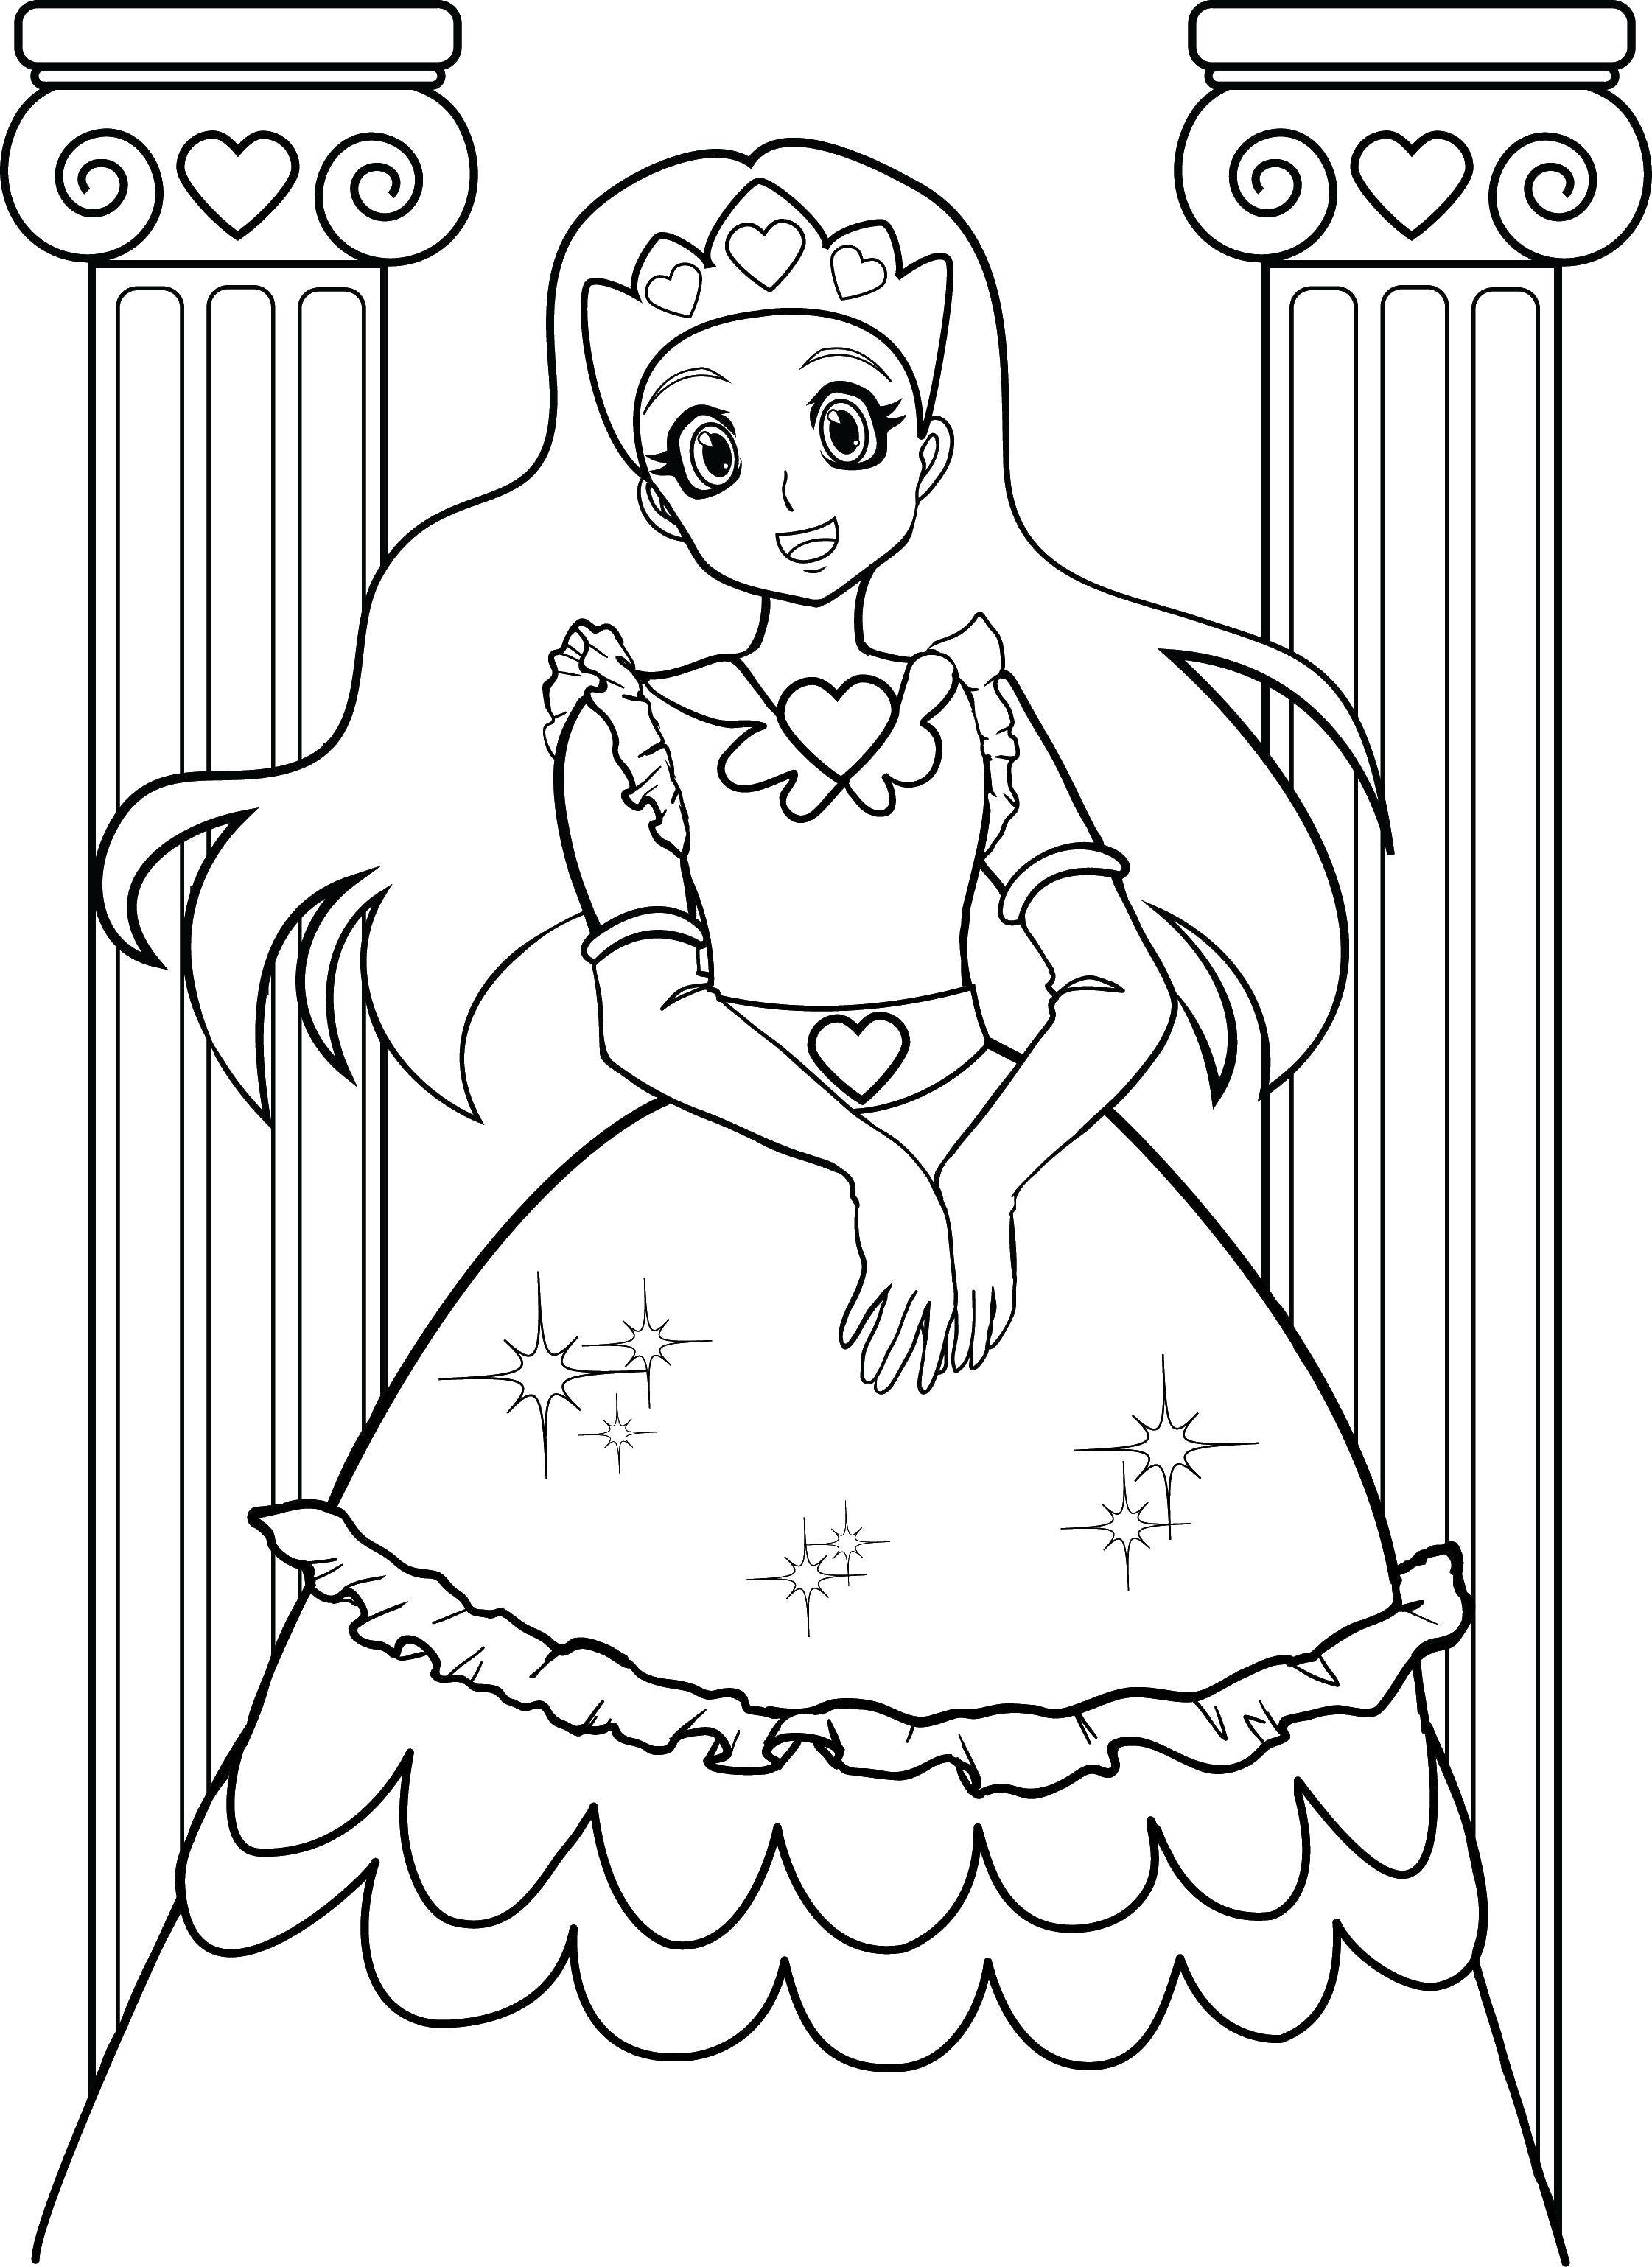 Coloring Princess with crown. Category For girls. Tags:  Princess.